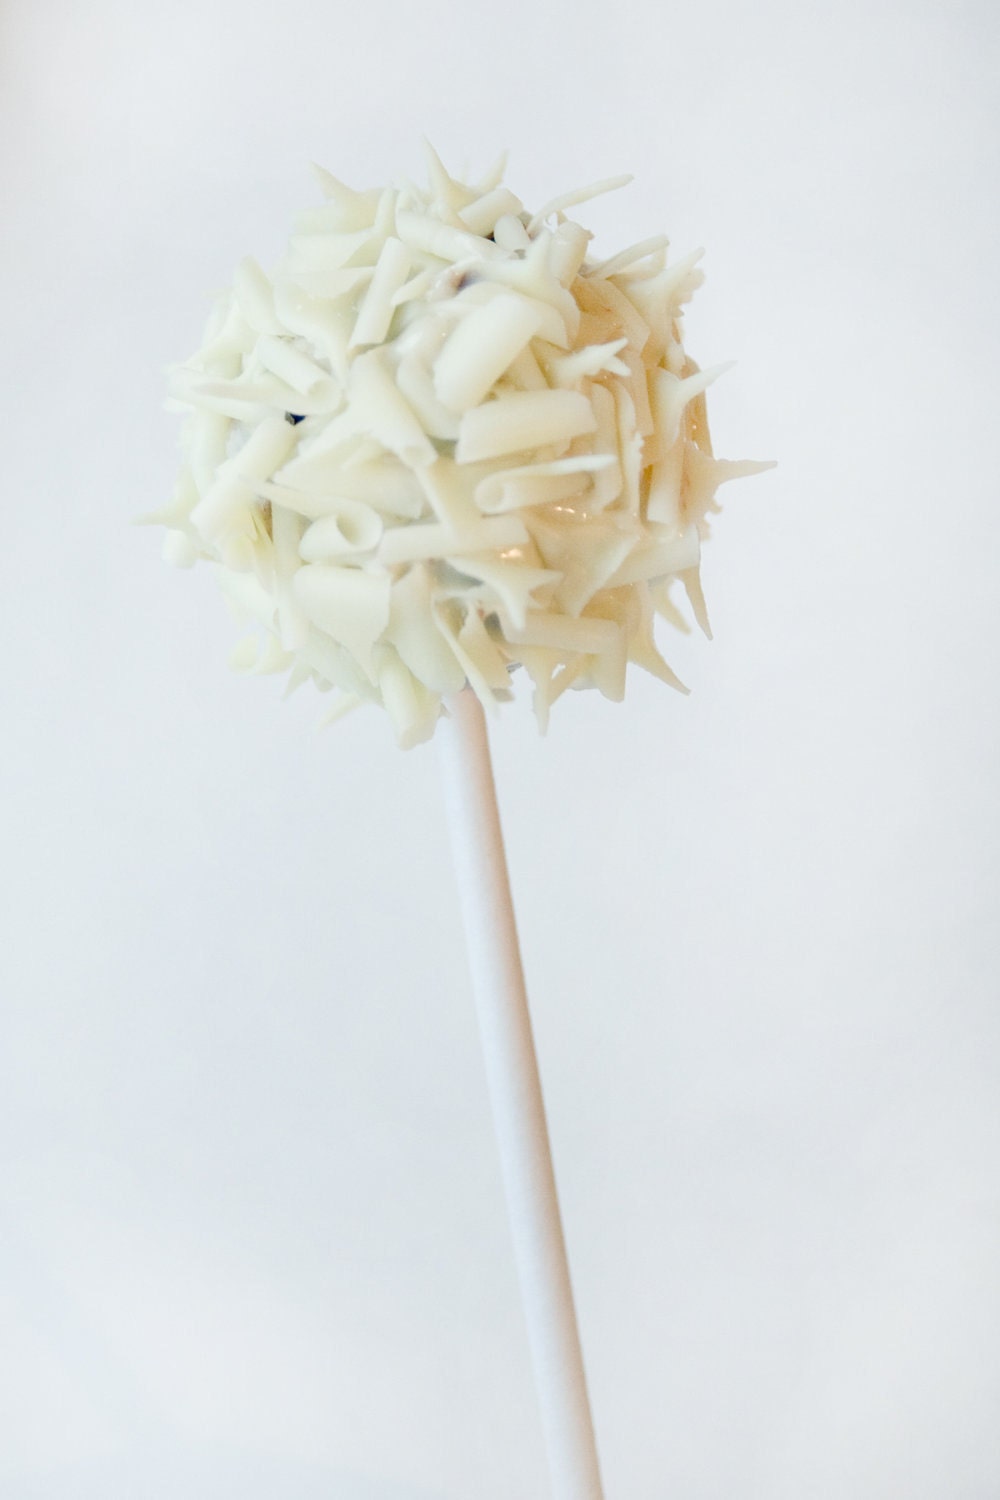 Rich homemade chocolate truffle pop coated in white chocolate and white chocolate curls - 6 - Trufflicious